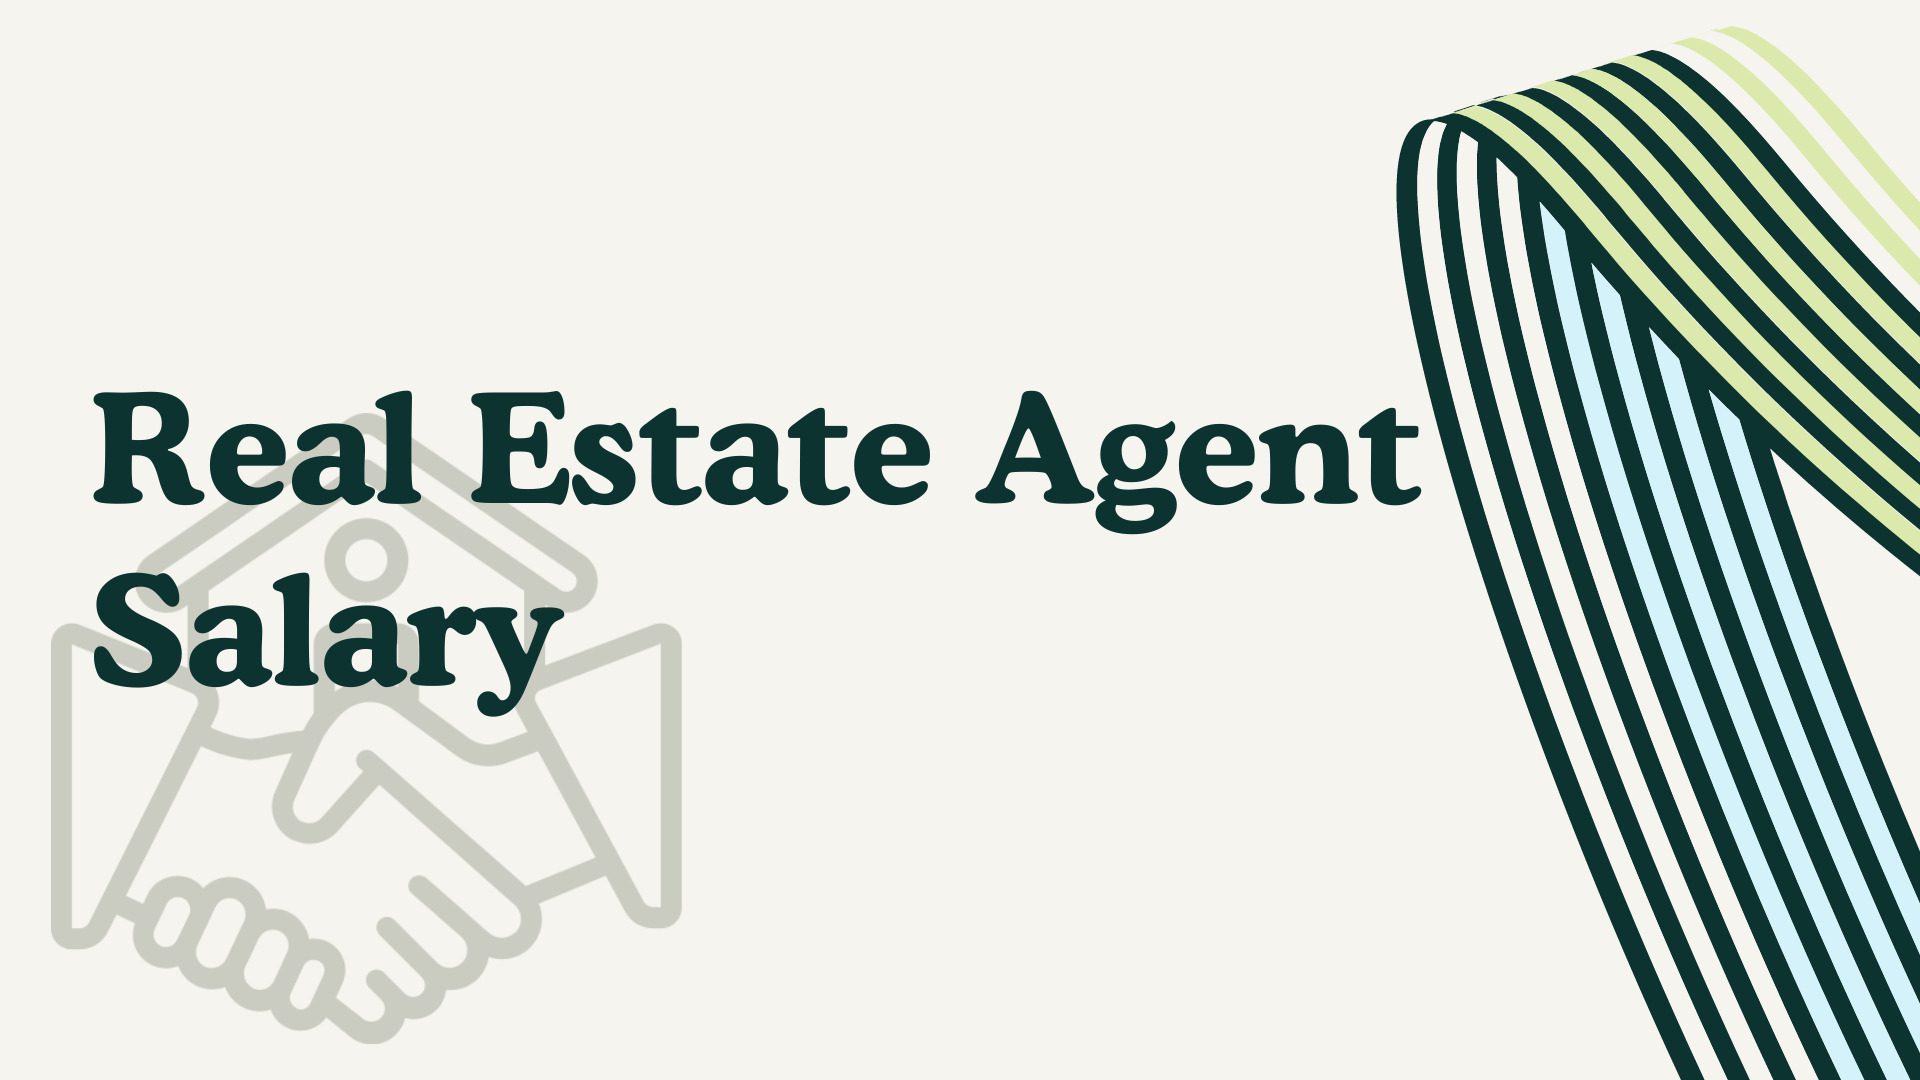 Real Estate Agent Salary 1 